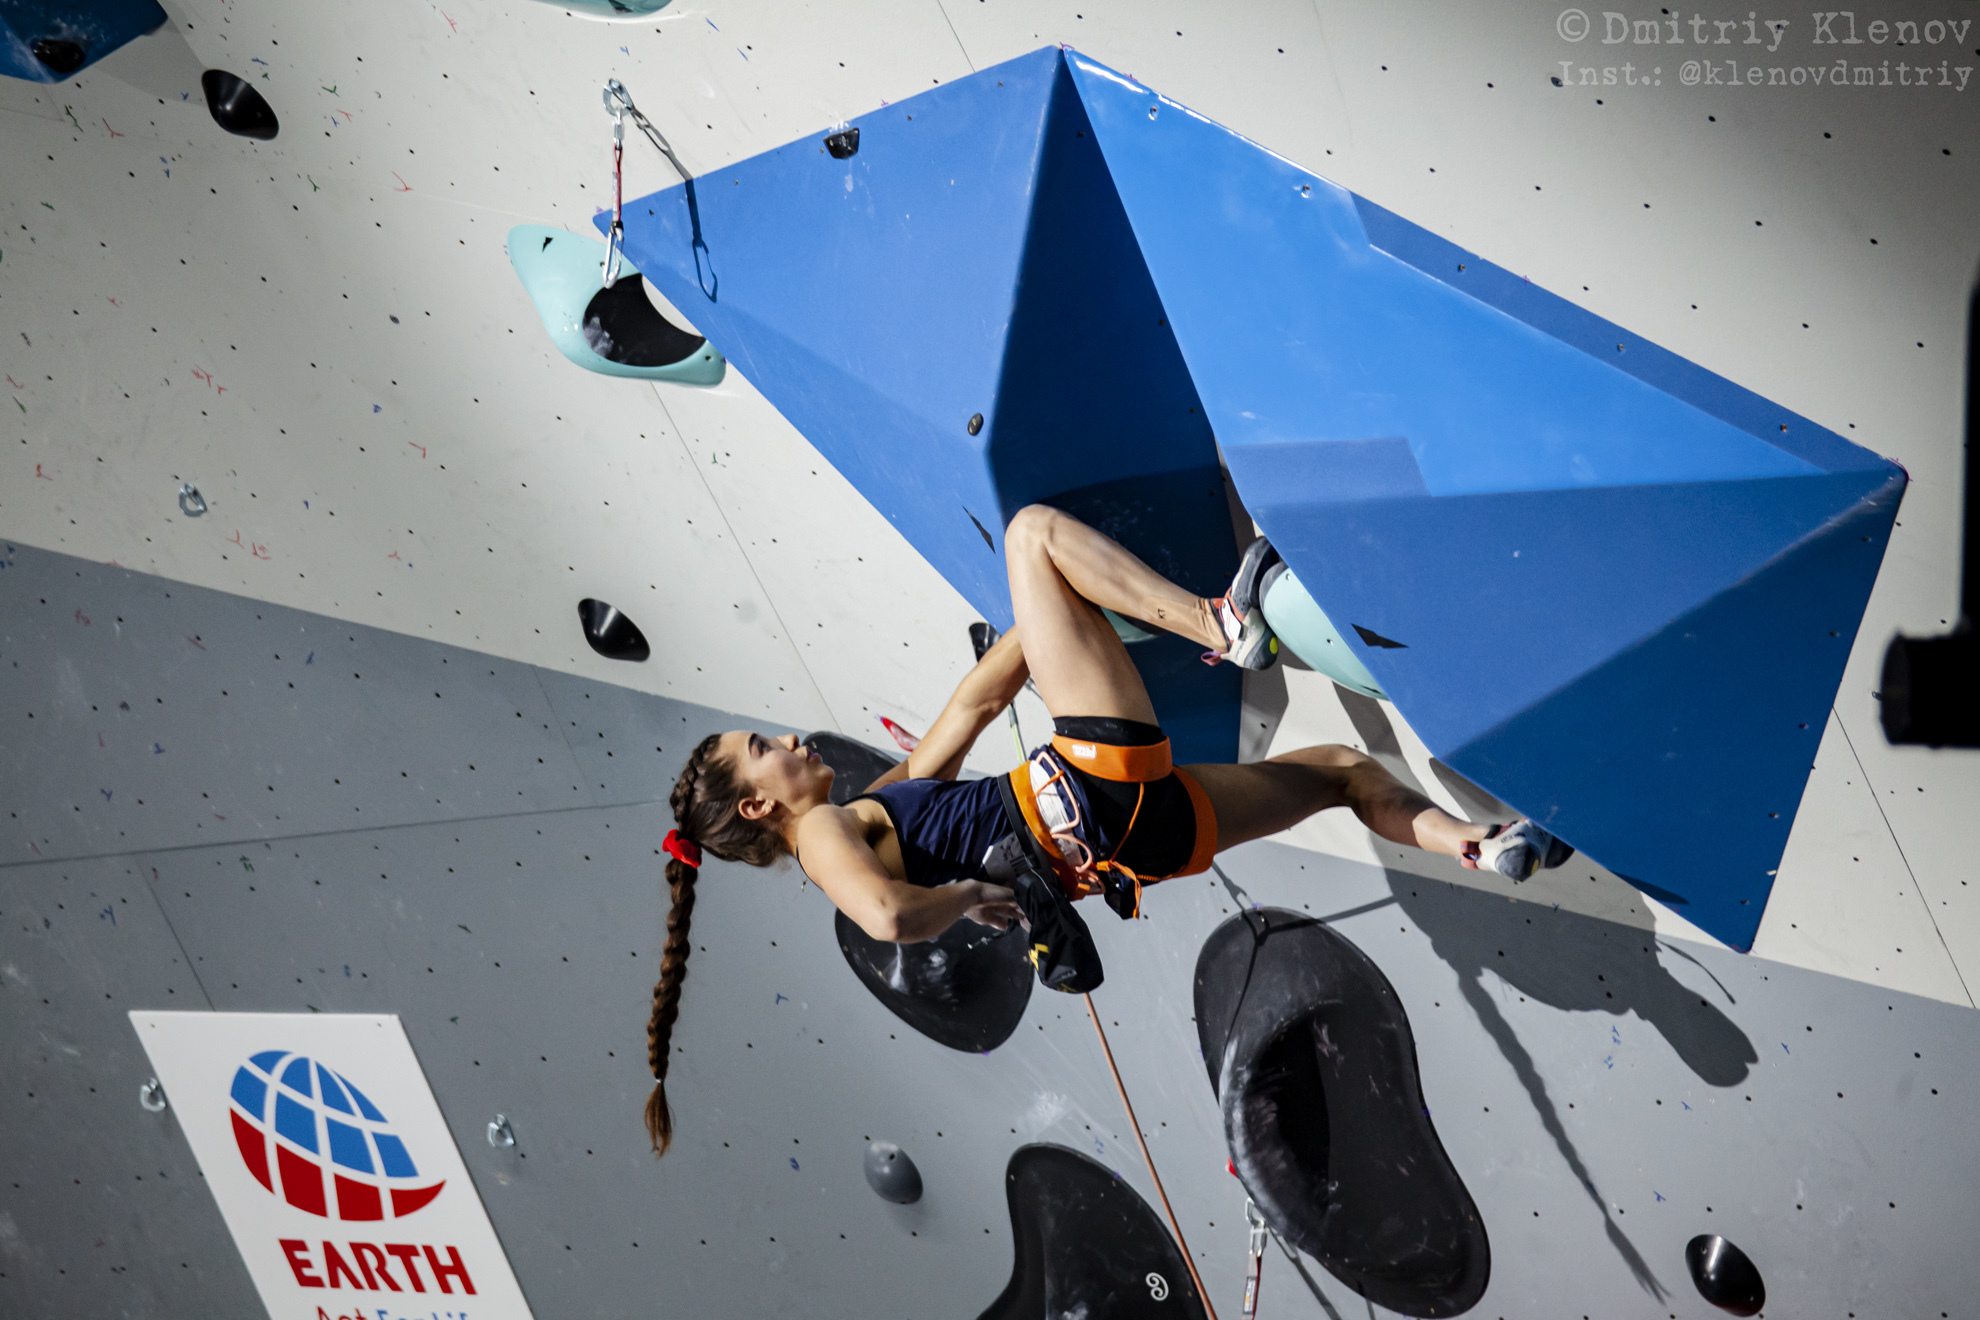 World Climbing Championship in Moscow. Final difficulty - My, Rock climbing, World championship, Sport, Competitions, Russia, Moscow, Climbing, The photo, Video, Longpost